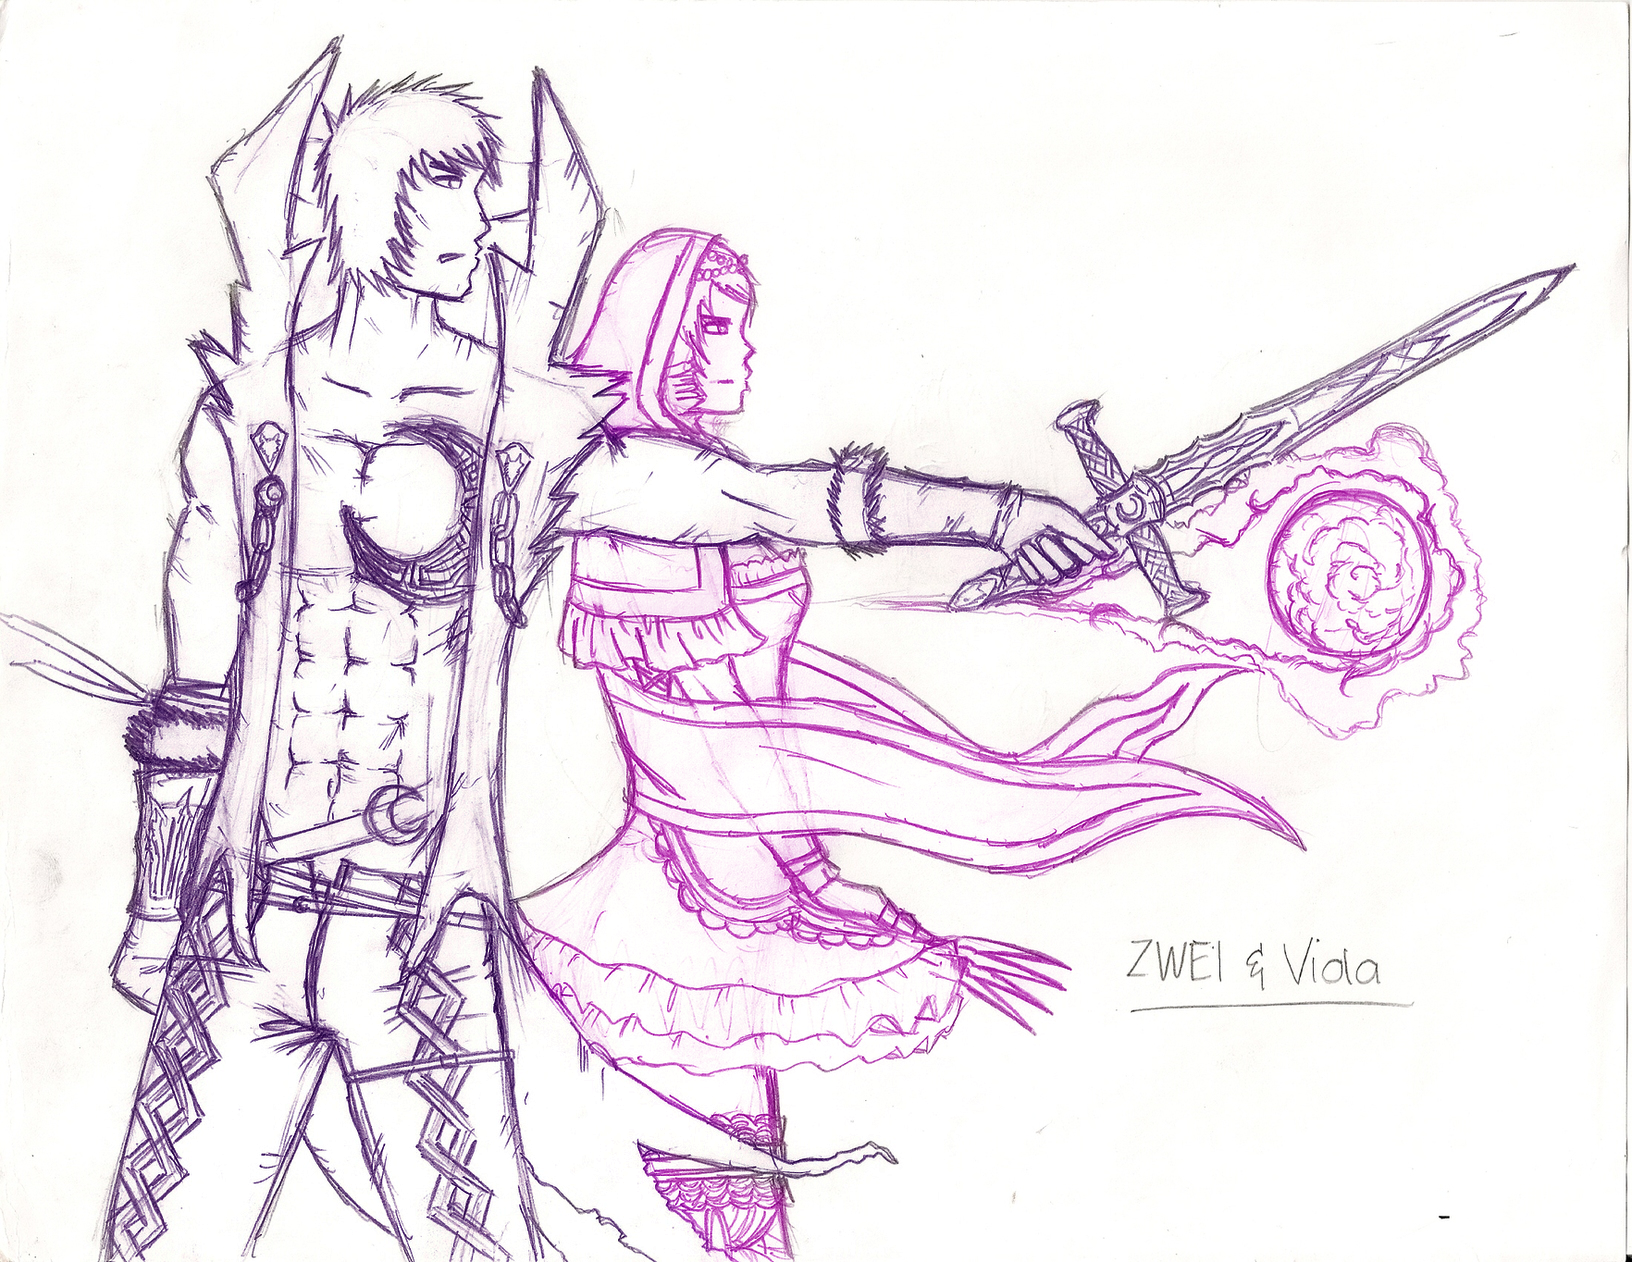 shades_of_purple_by_fatal_exodus-d4ecdef.png